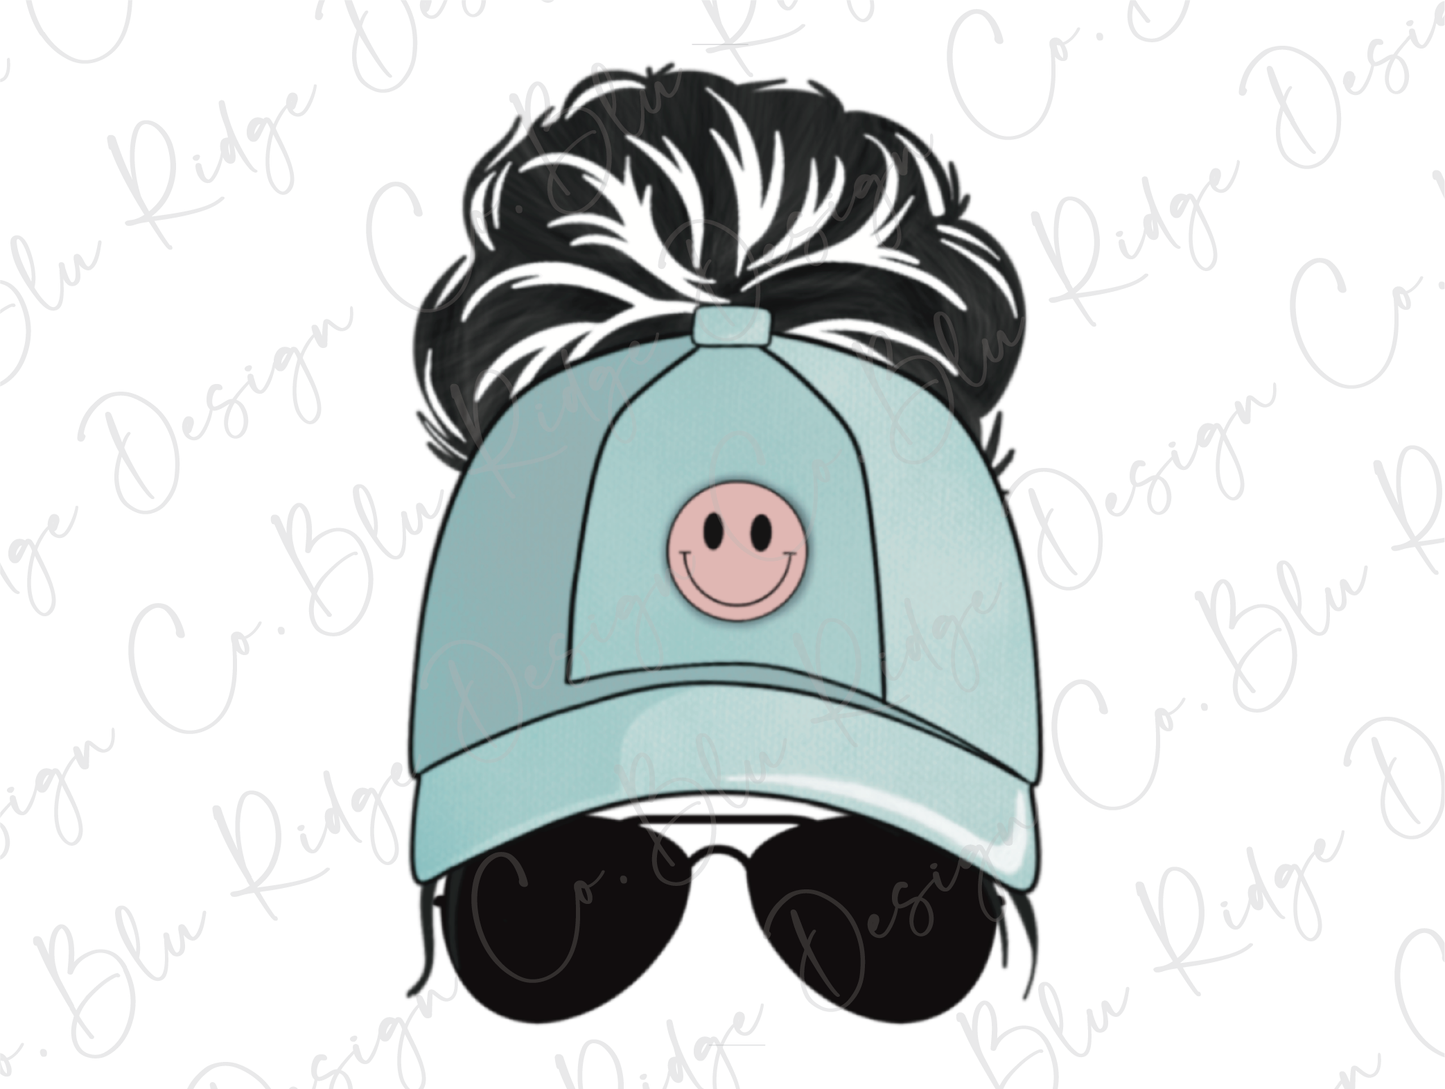 a drawing of a pig wearing a hat and sunglasses